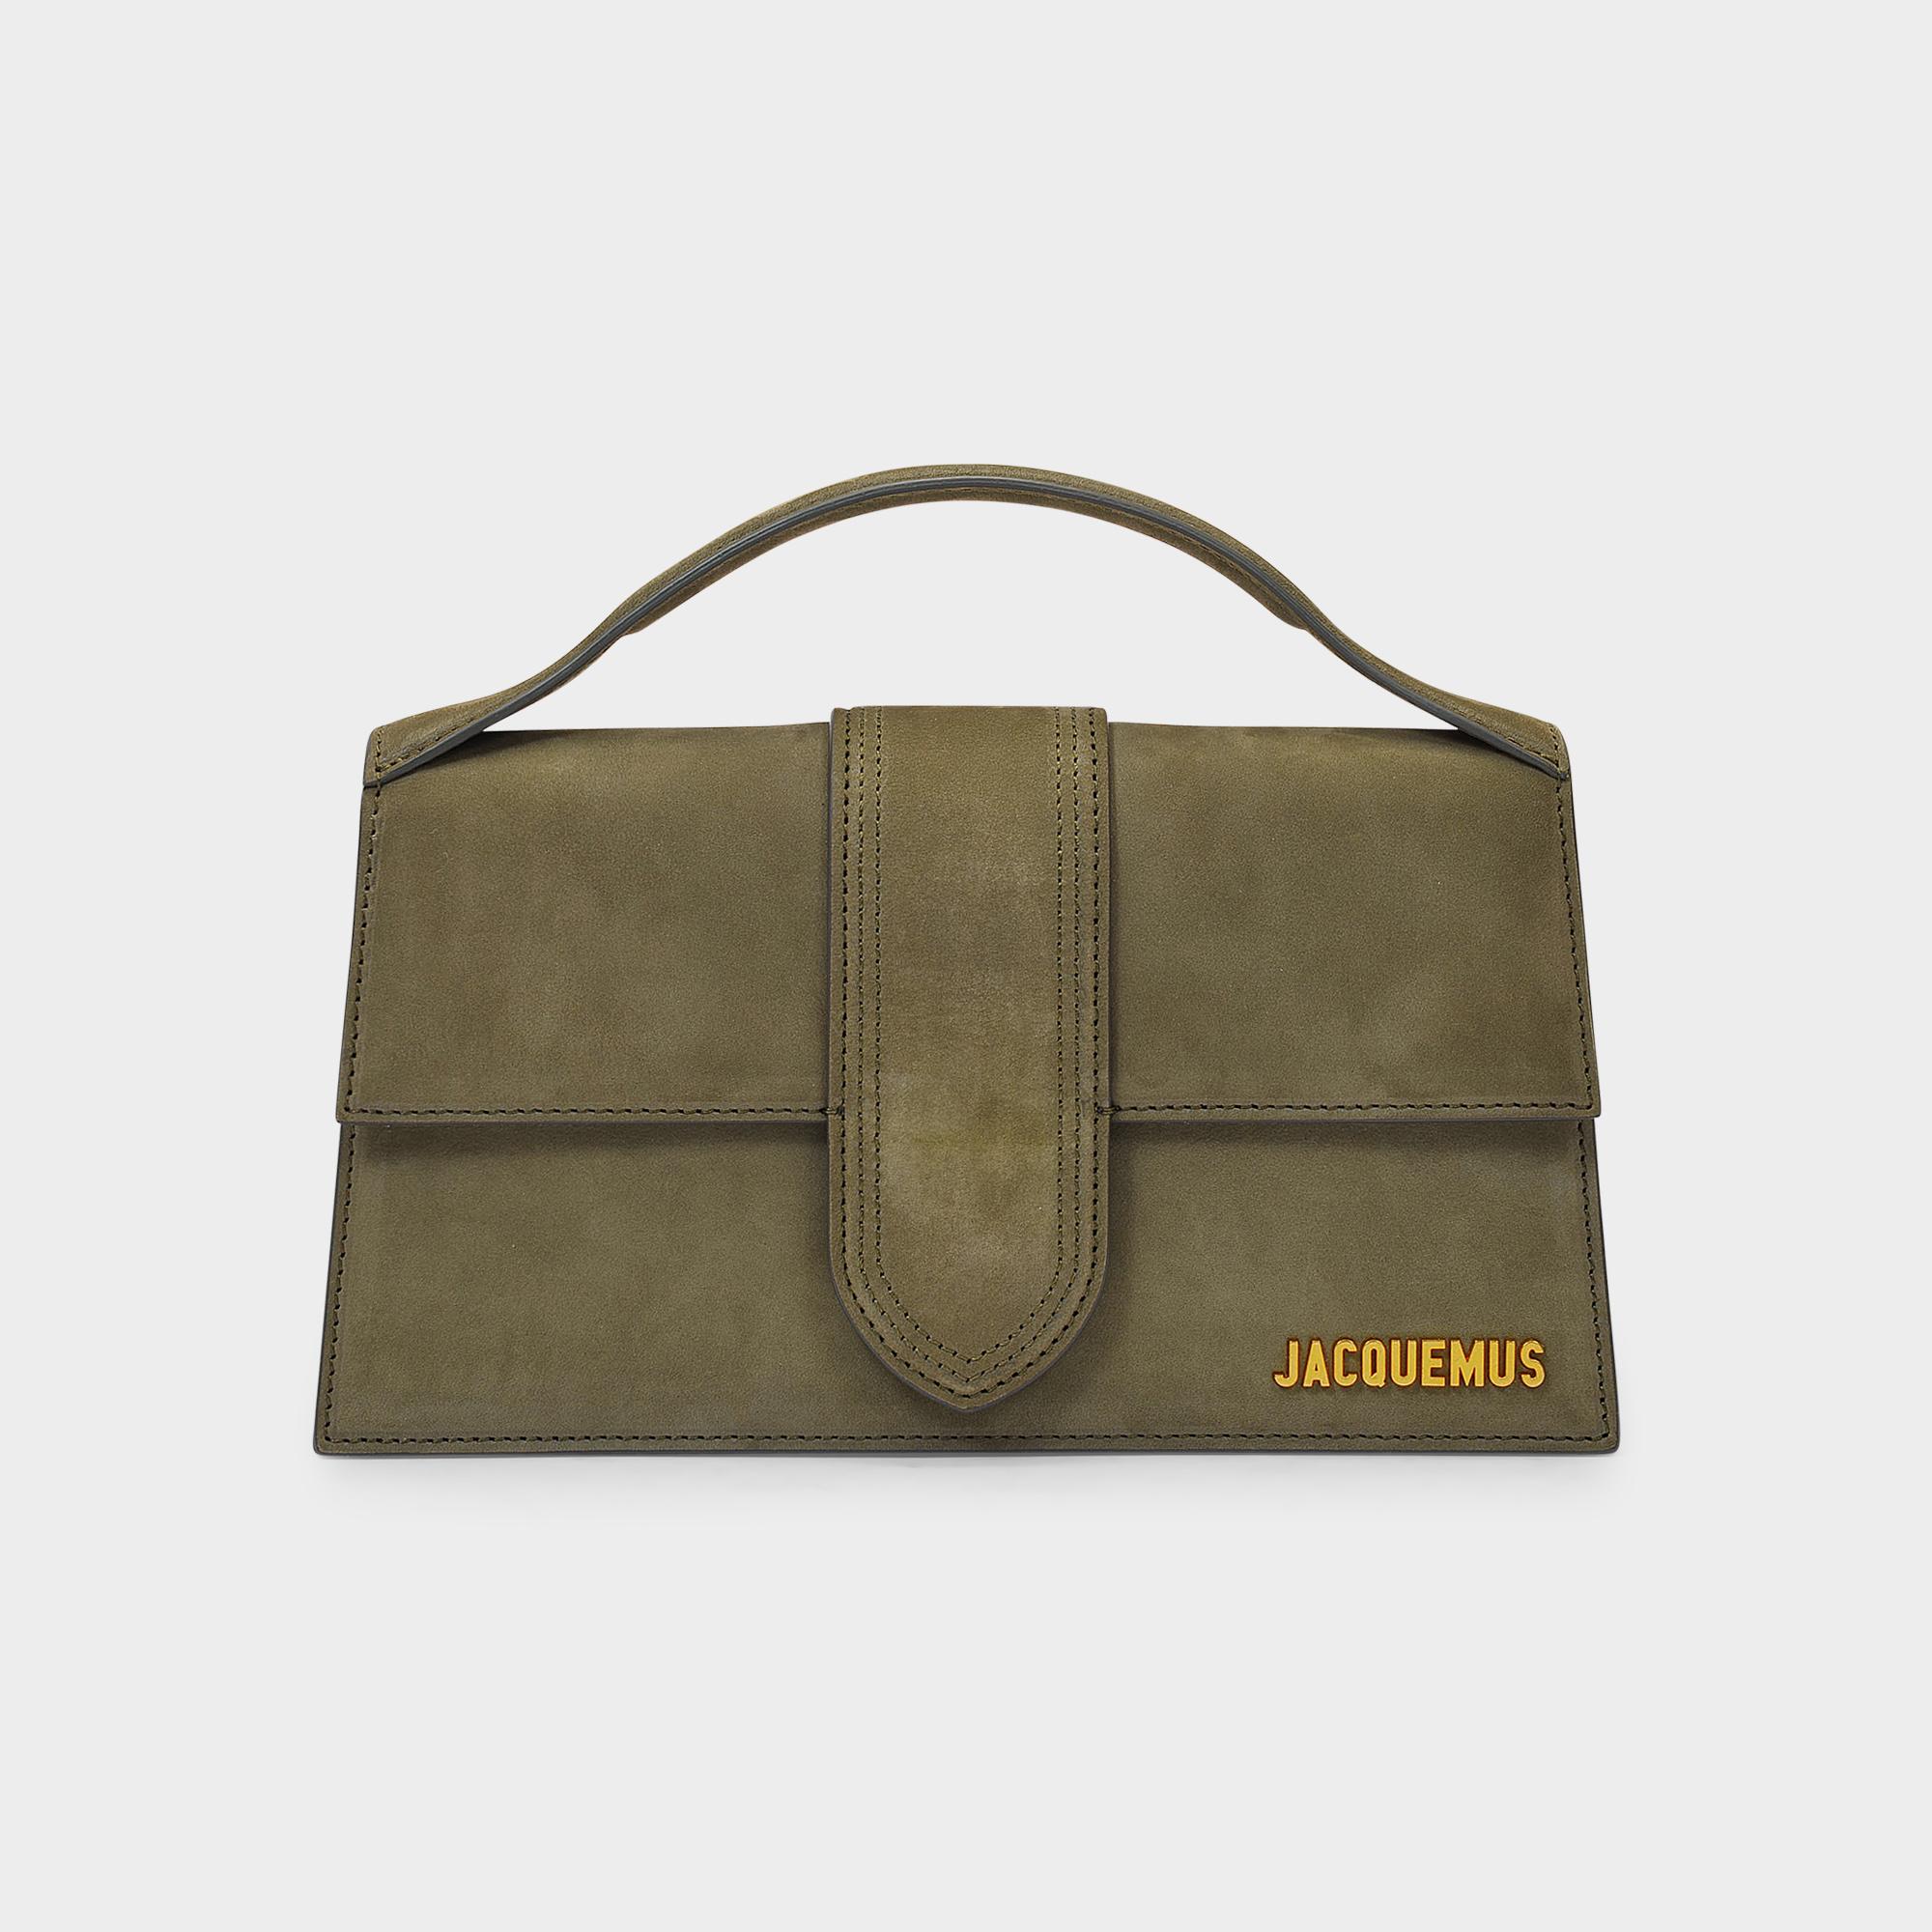 Jacquemus Handbag Le Grand Bambino In Green Forest Suede Calf Leather ...